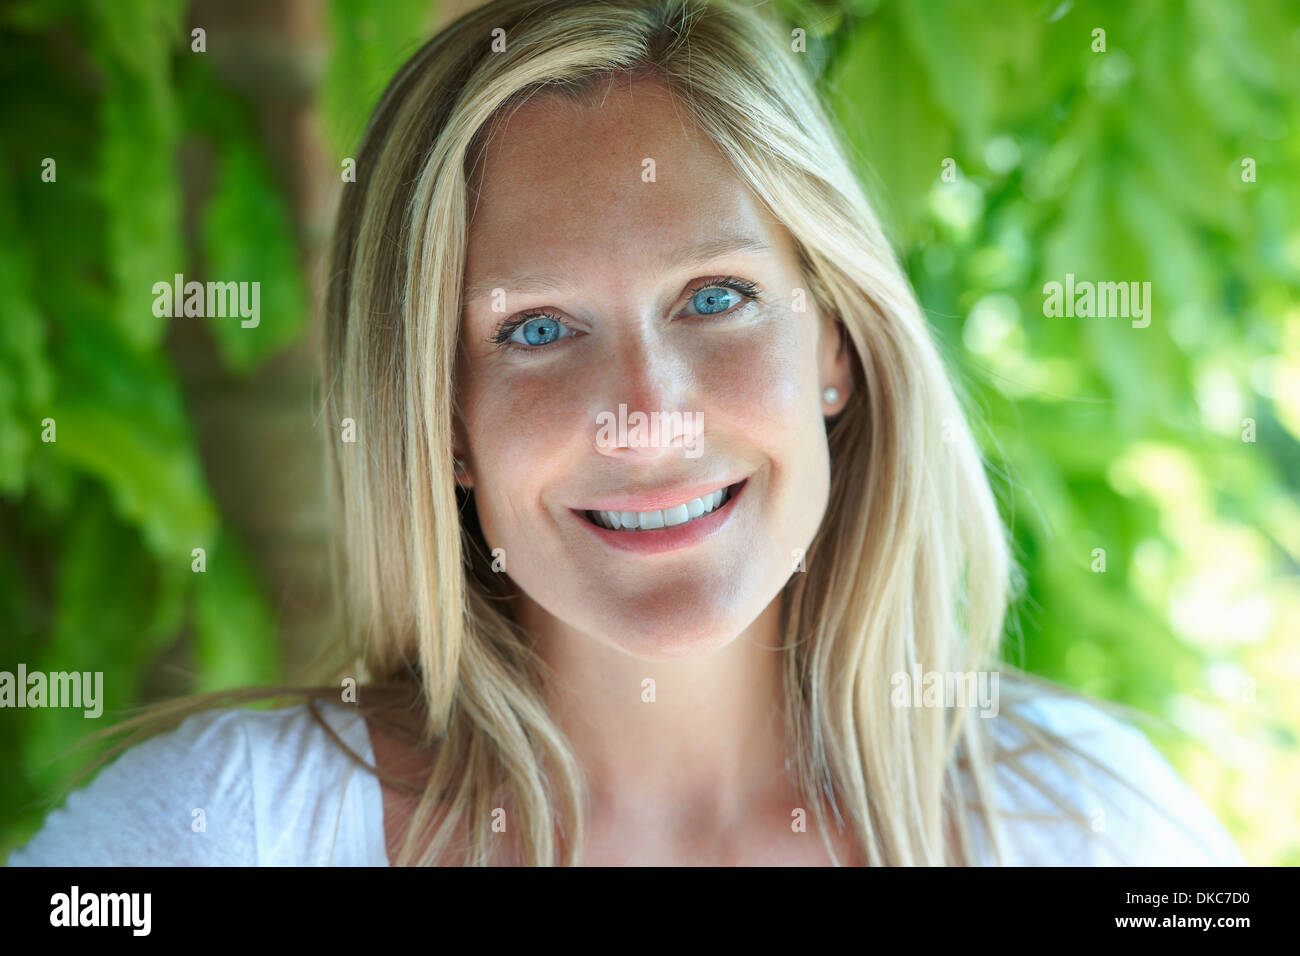 Portrait of mature woman with blonde hair and blue eyes Stock Photo